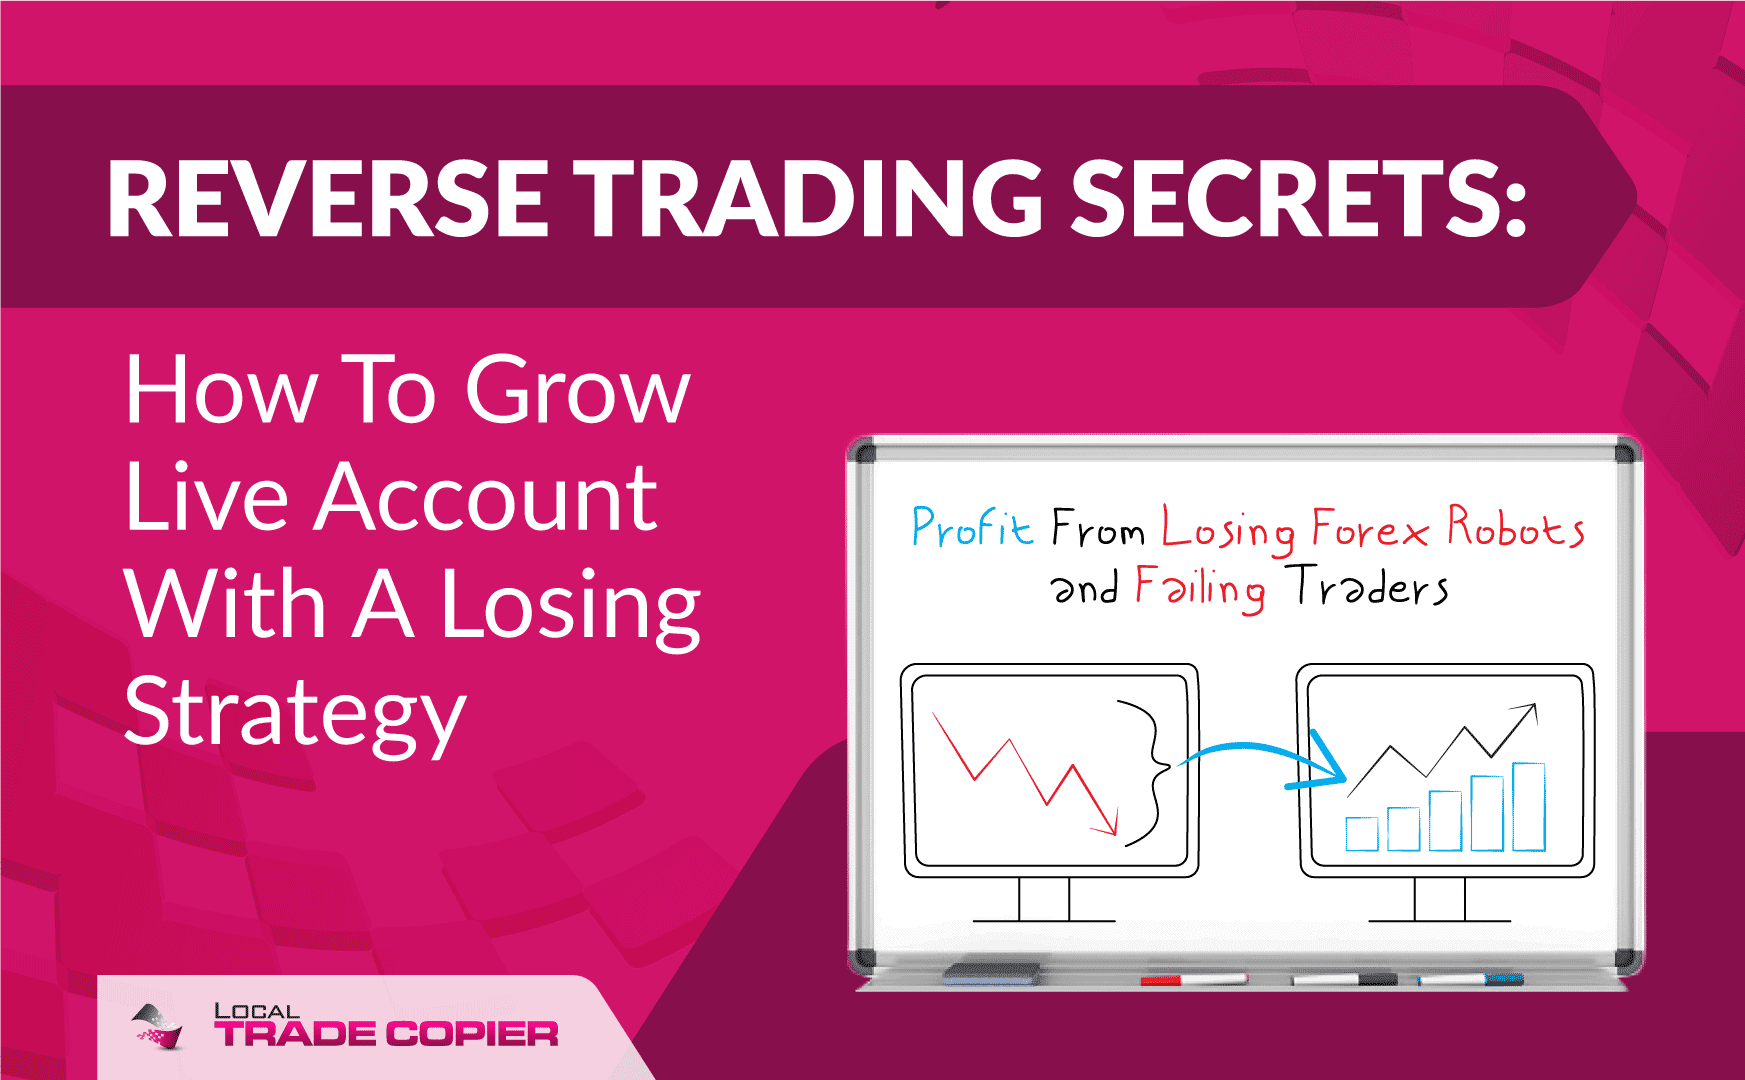 Local-Trade-Copier-Tutorials-Reverse-Trading-Secrets-How-To-Grow-Live-Account-With-A-Losing-Strategy-1745x1080-v5